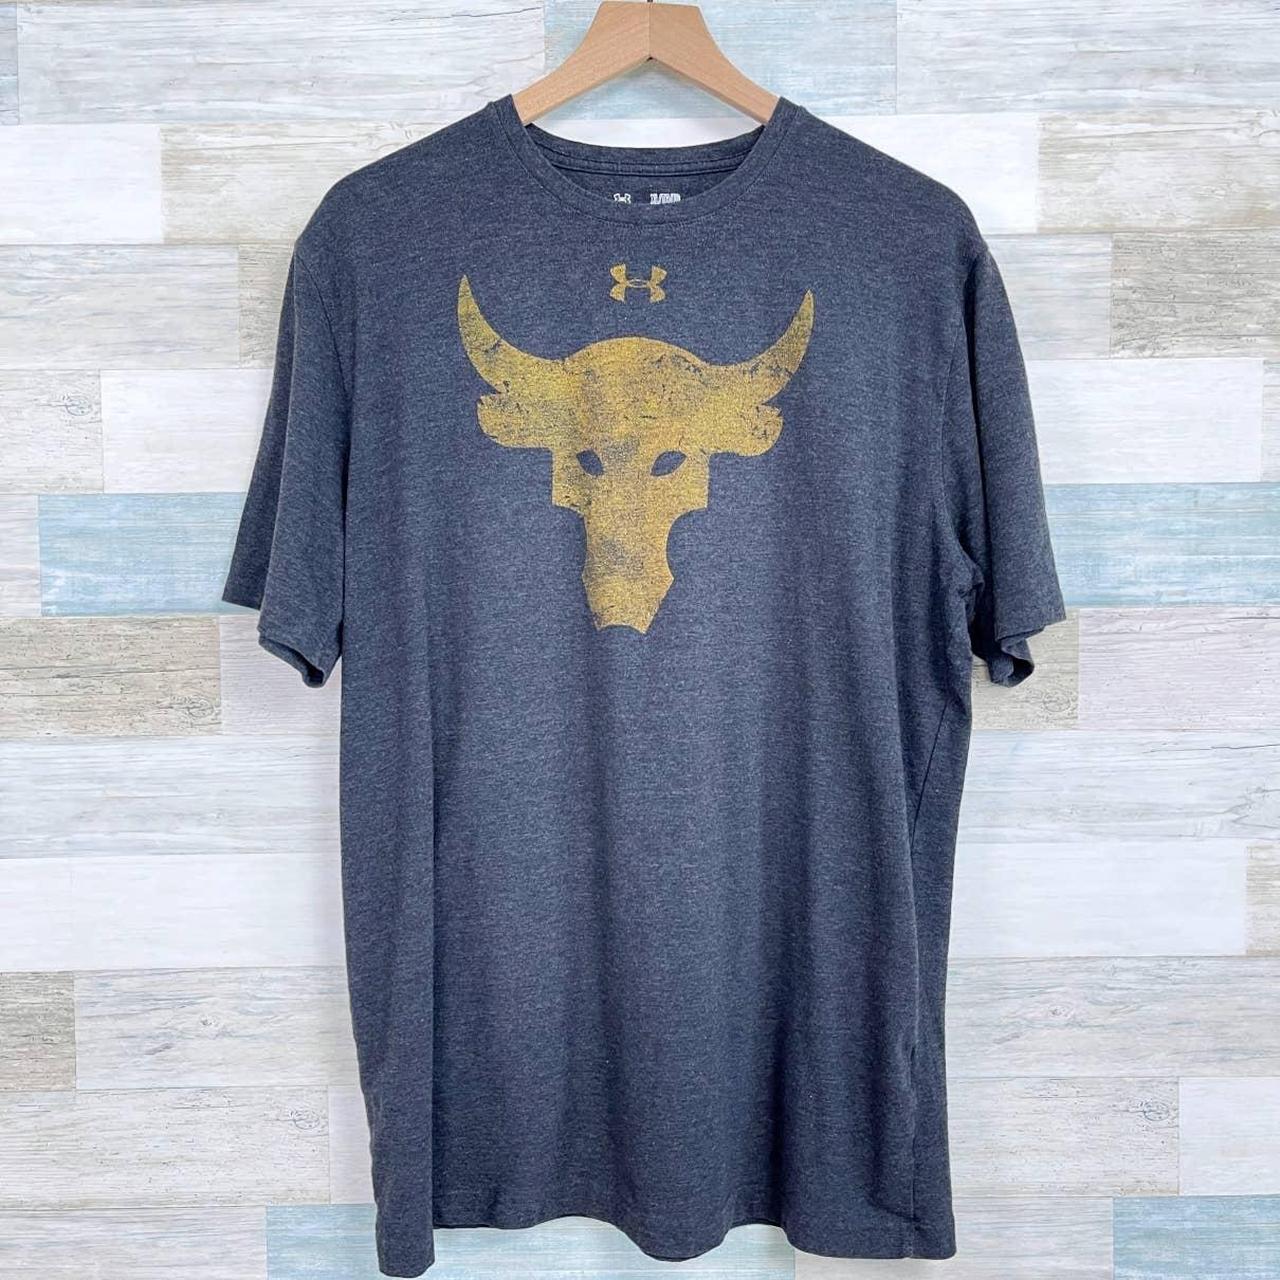  Under Armour Project Rock Bull Graphic Short-sleeve